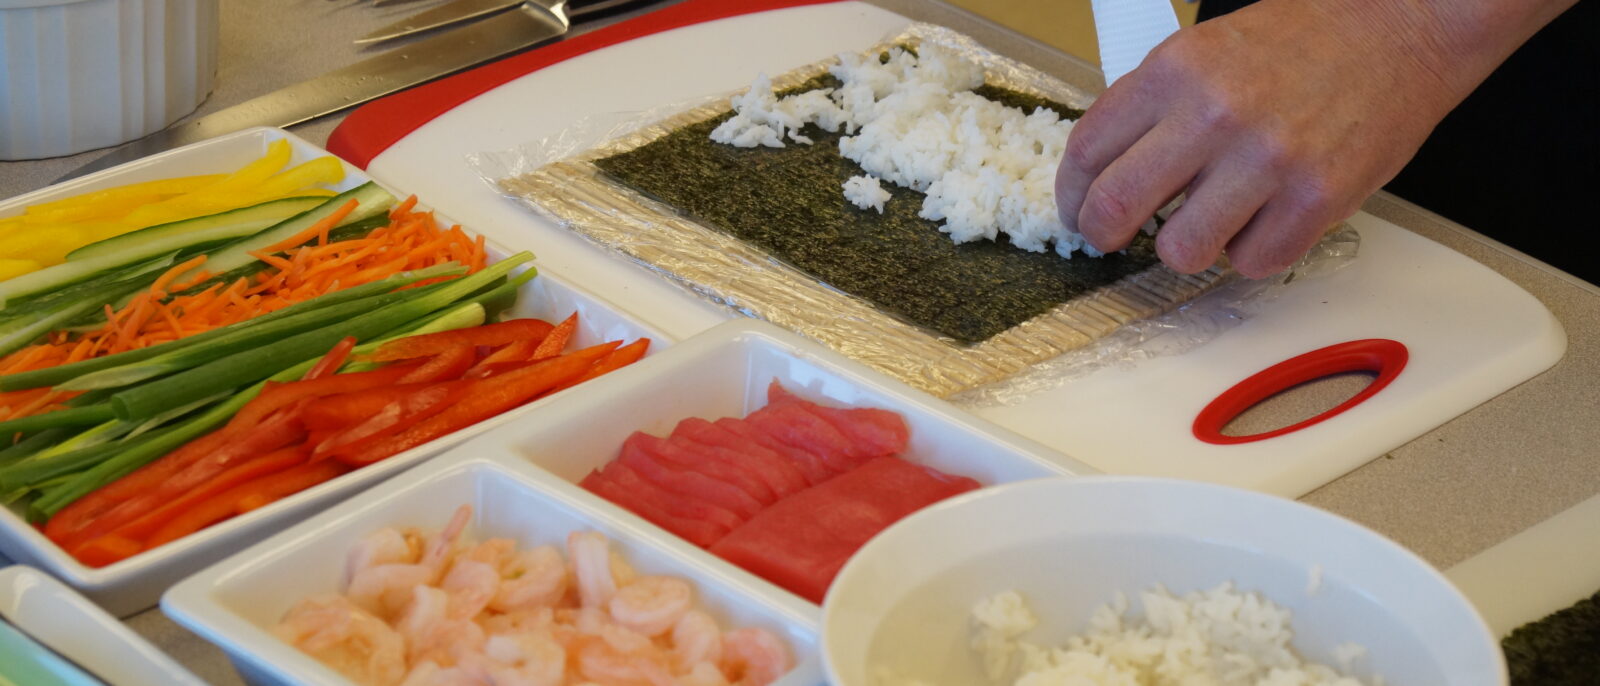 Shallow dishes filled with ingredients such as peppers, shrimp and rice are on a table while two hands work on putting rice on seaweed paper.